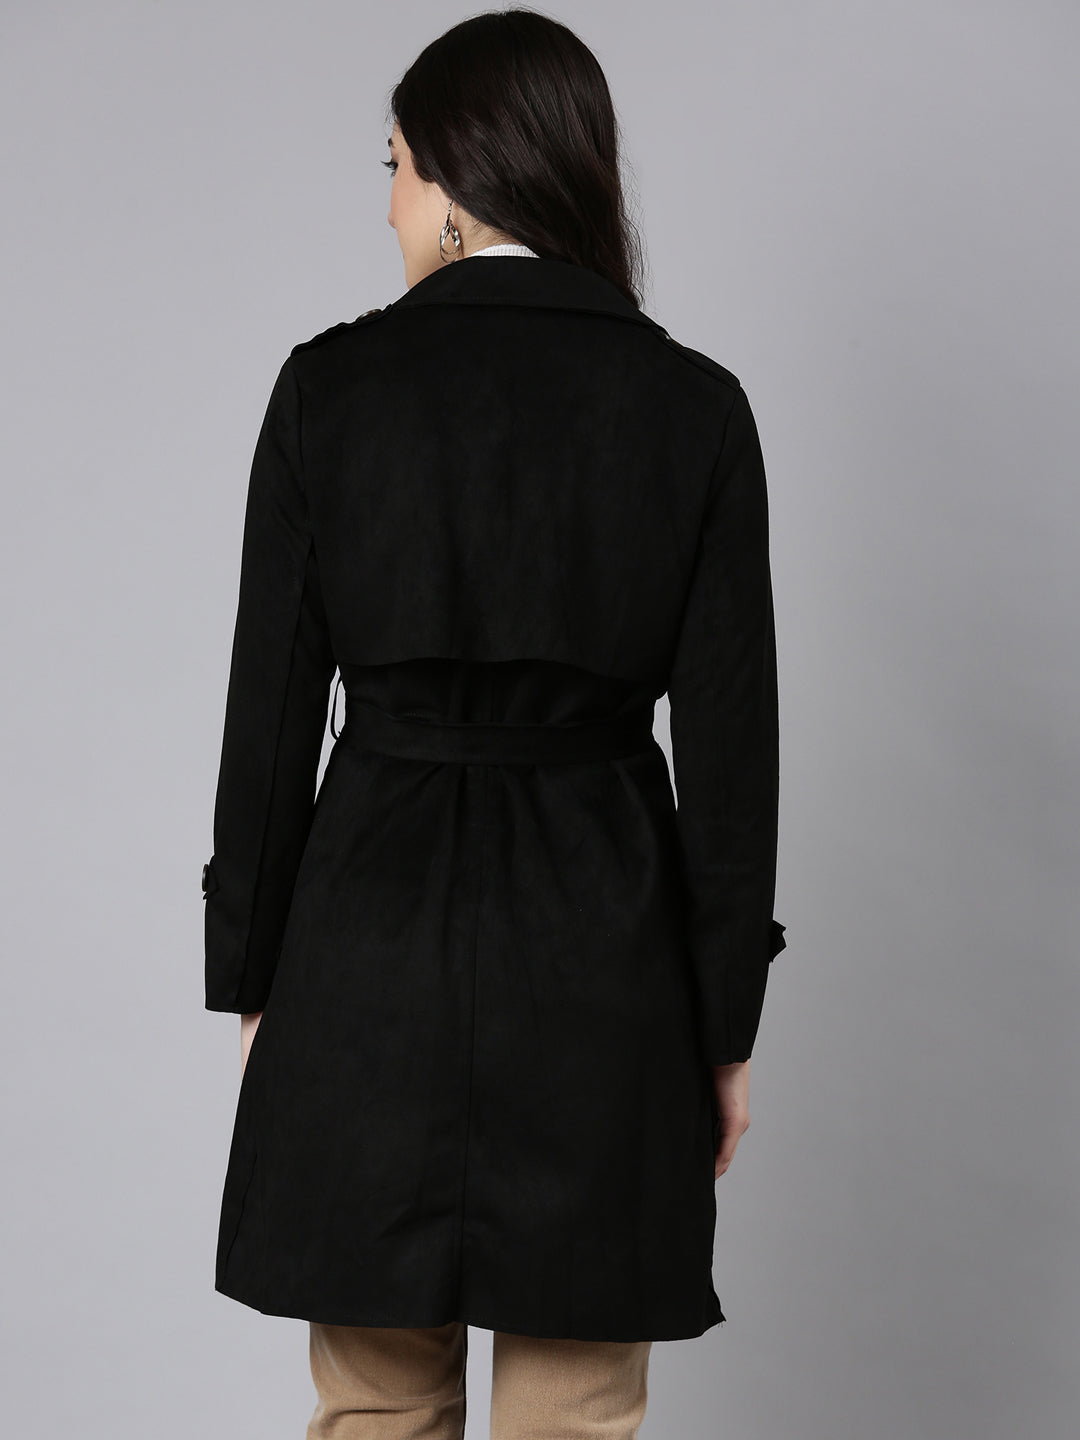 Women Solid Longline Black Trench Coat comes with Belt